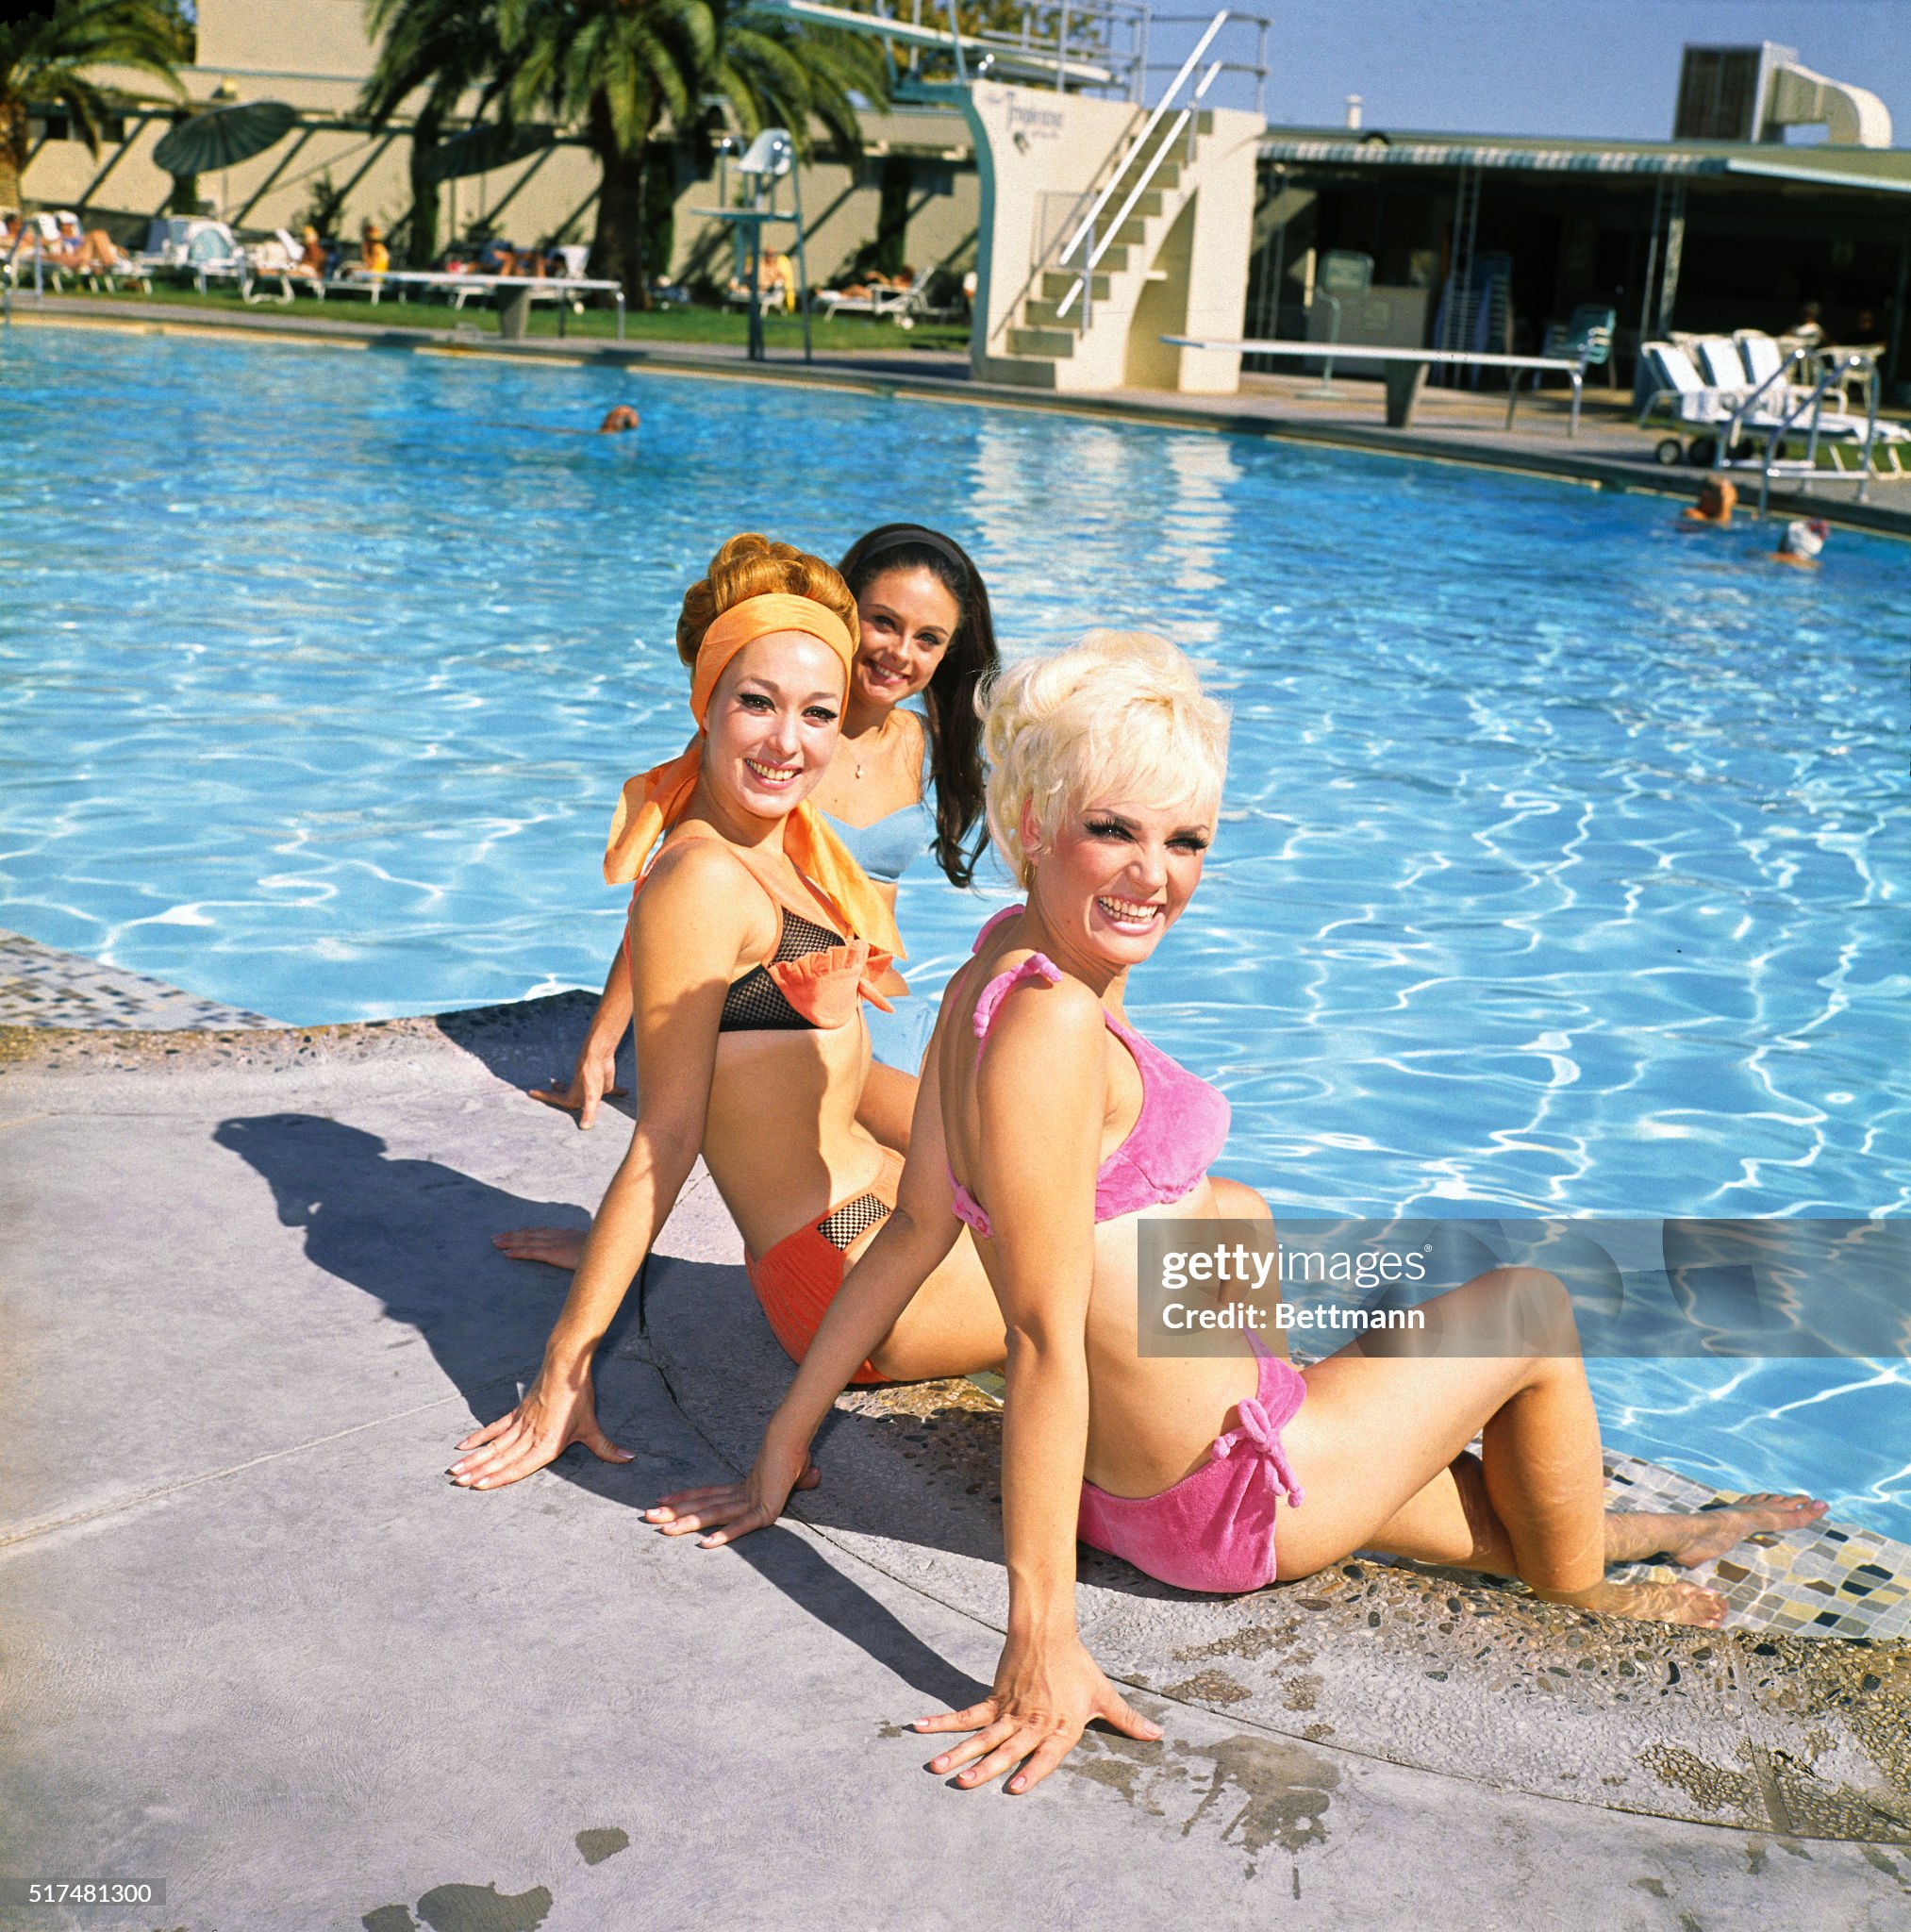 Poolside: the girls, who all dance in the Folies Bergere at the plush Hotel Tropicana, Las Vegas, in 1968 are: Virginia Justus, the blonde; Lydia Torea, the redhead; and the brunet, Sharon Cunningham. The Torea gal was once a partner of Jose Greco. 